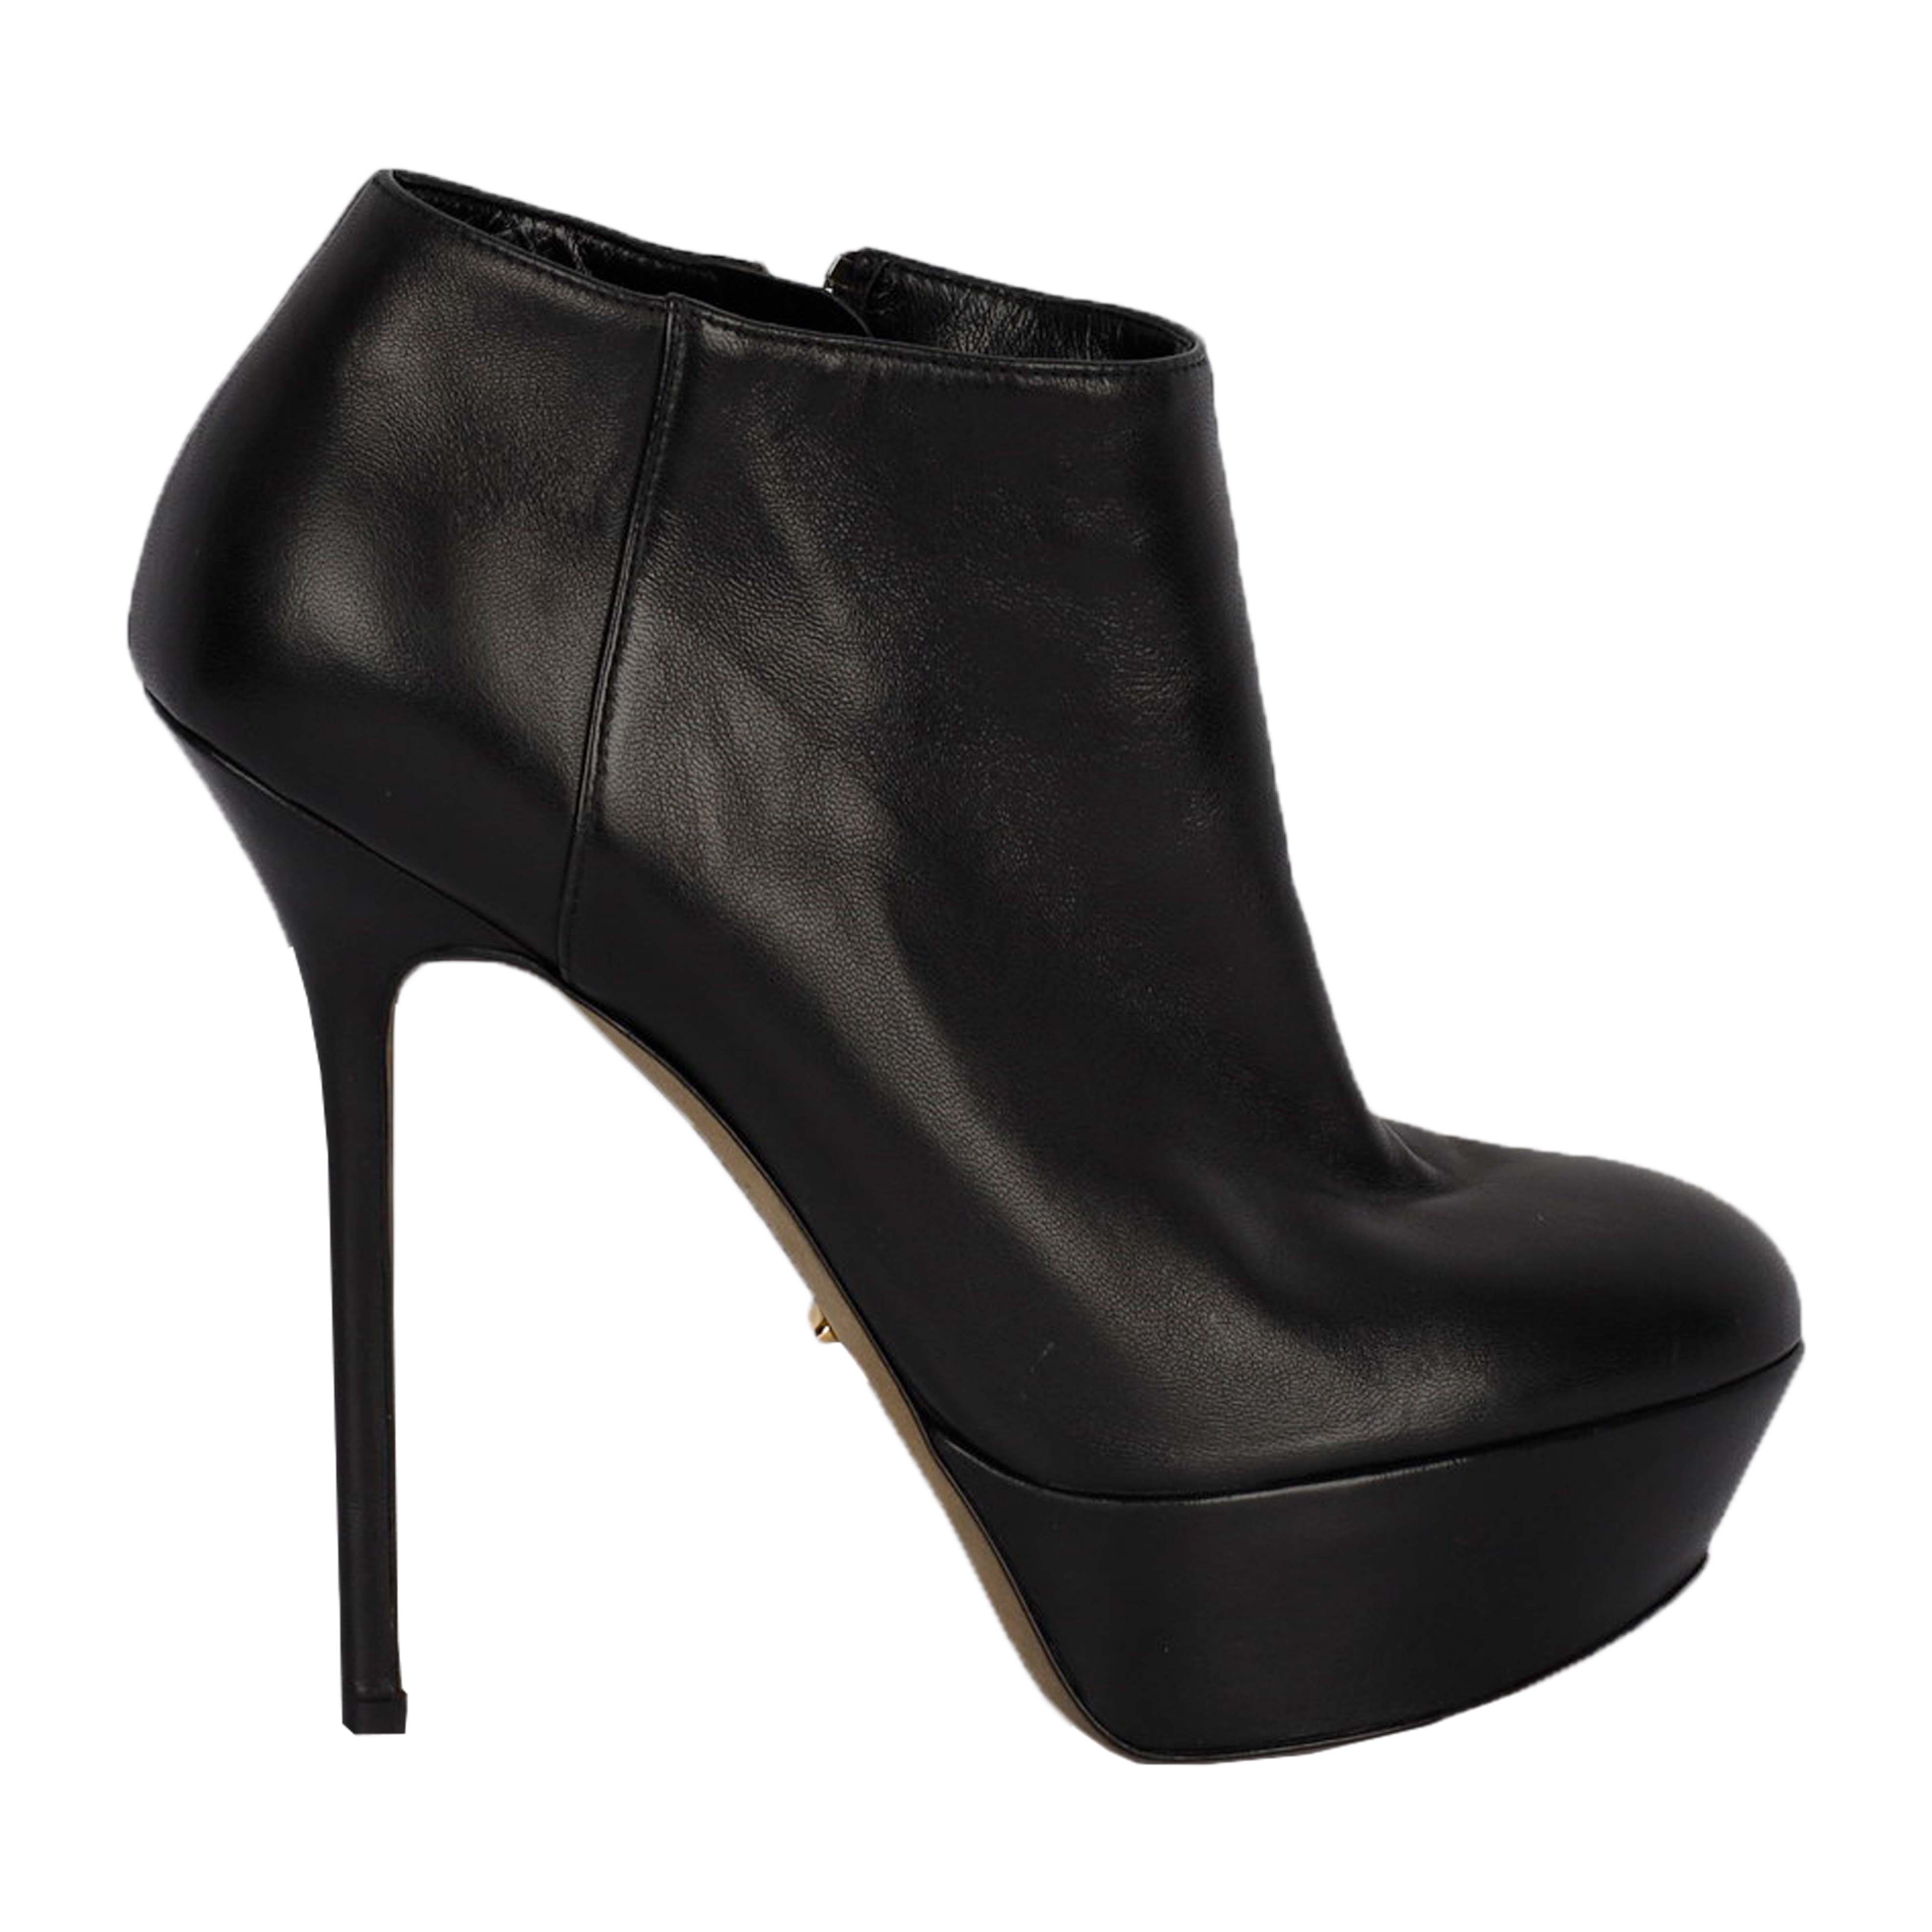 Sergio Rossi Platform Heeled Ankle Boots- '20s